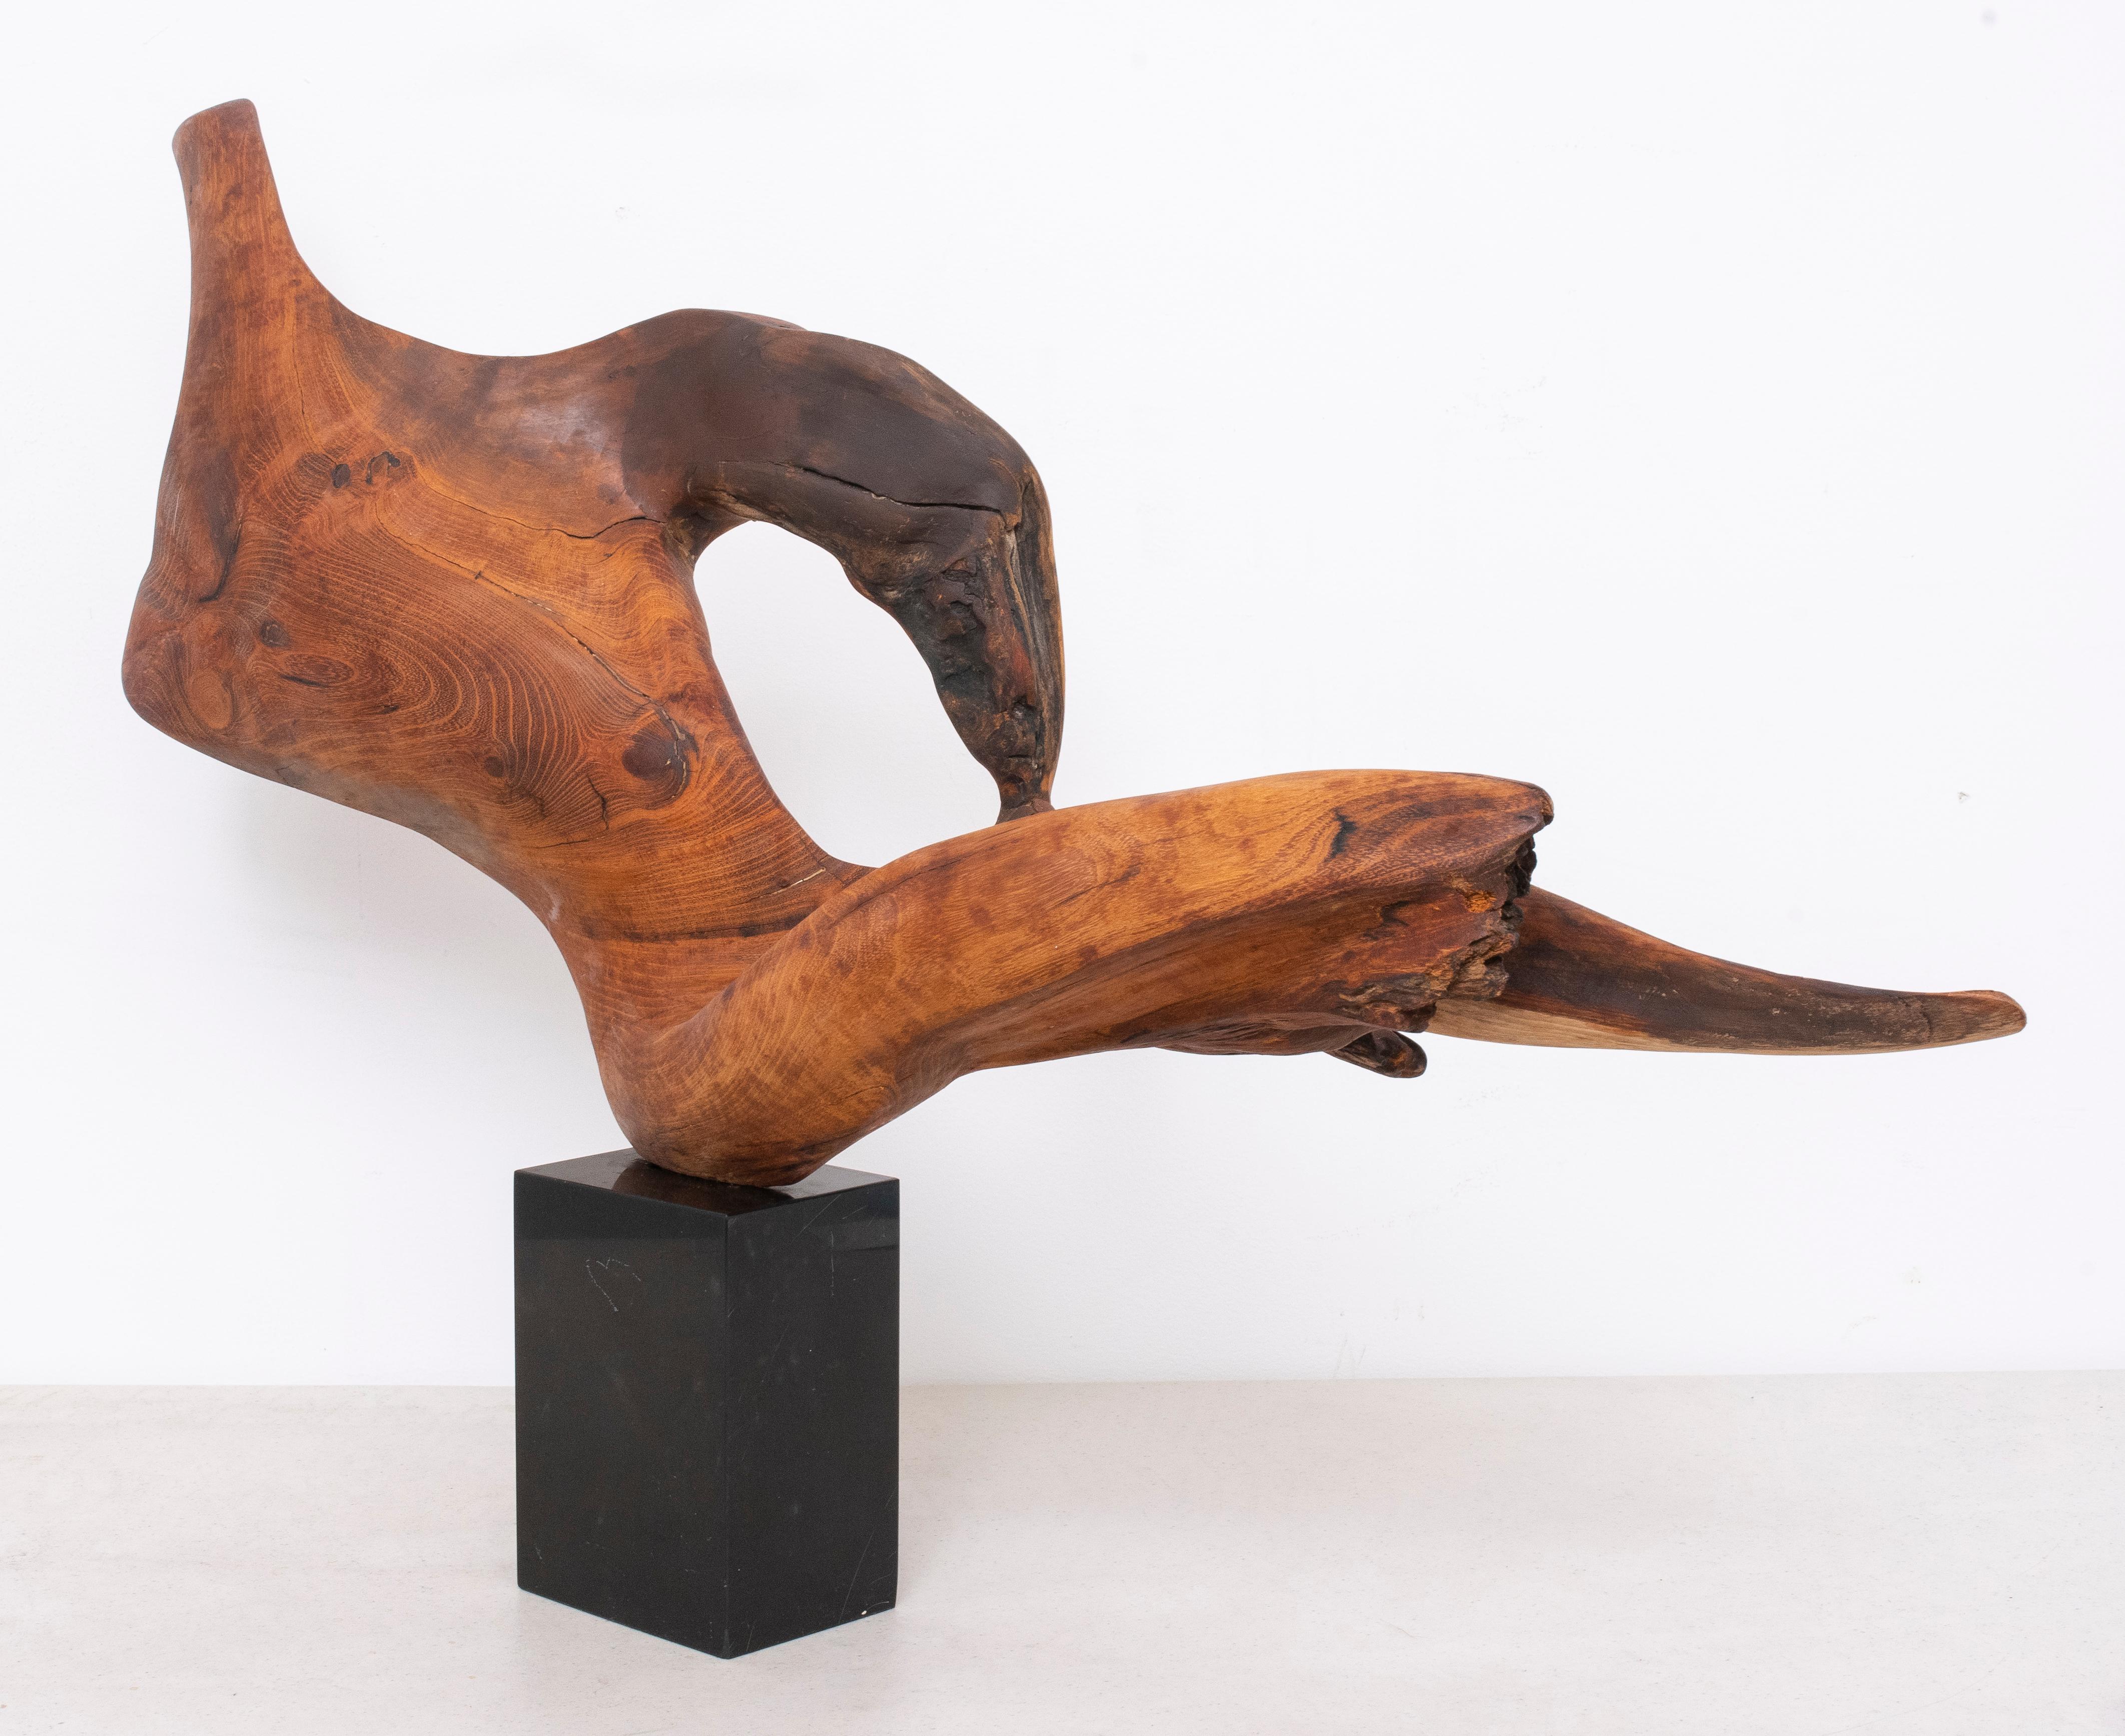 Modern abstract wood sculpture of flowing form resembling a reclining headless figure with burled grain, mounted upon a black marble base, no visible signature. 20.1